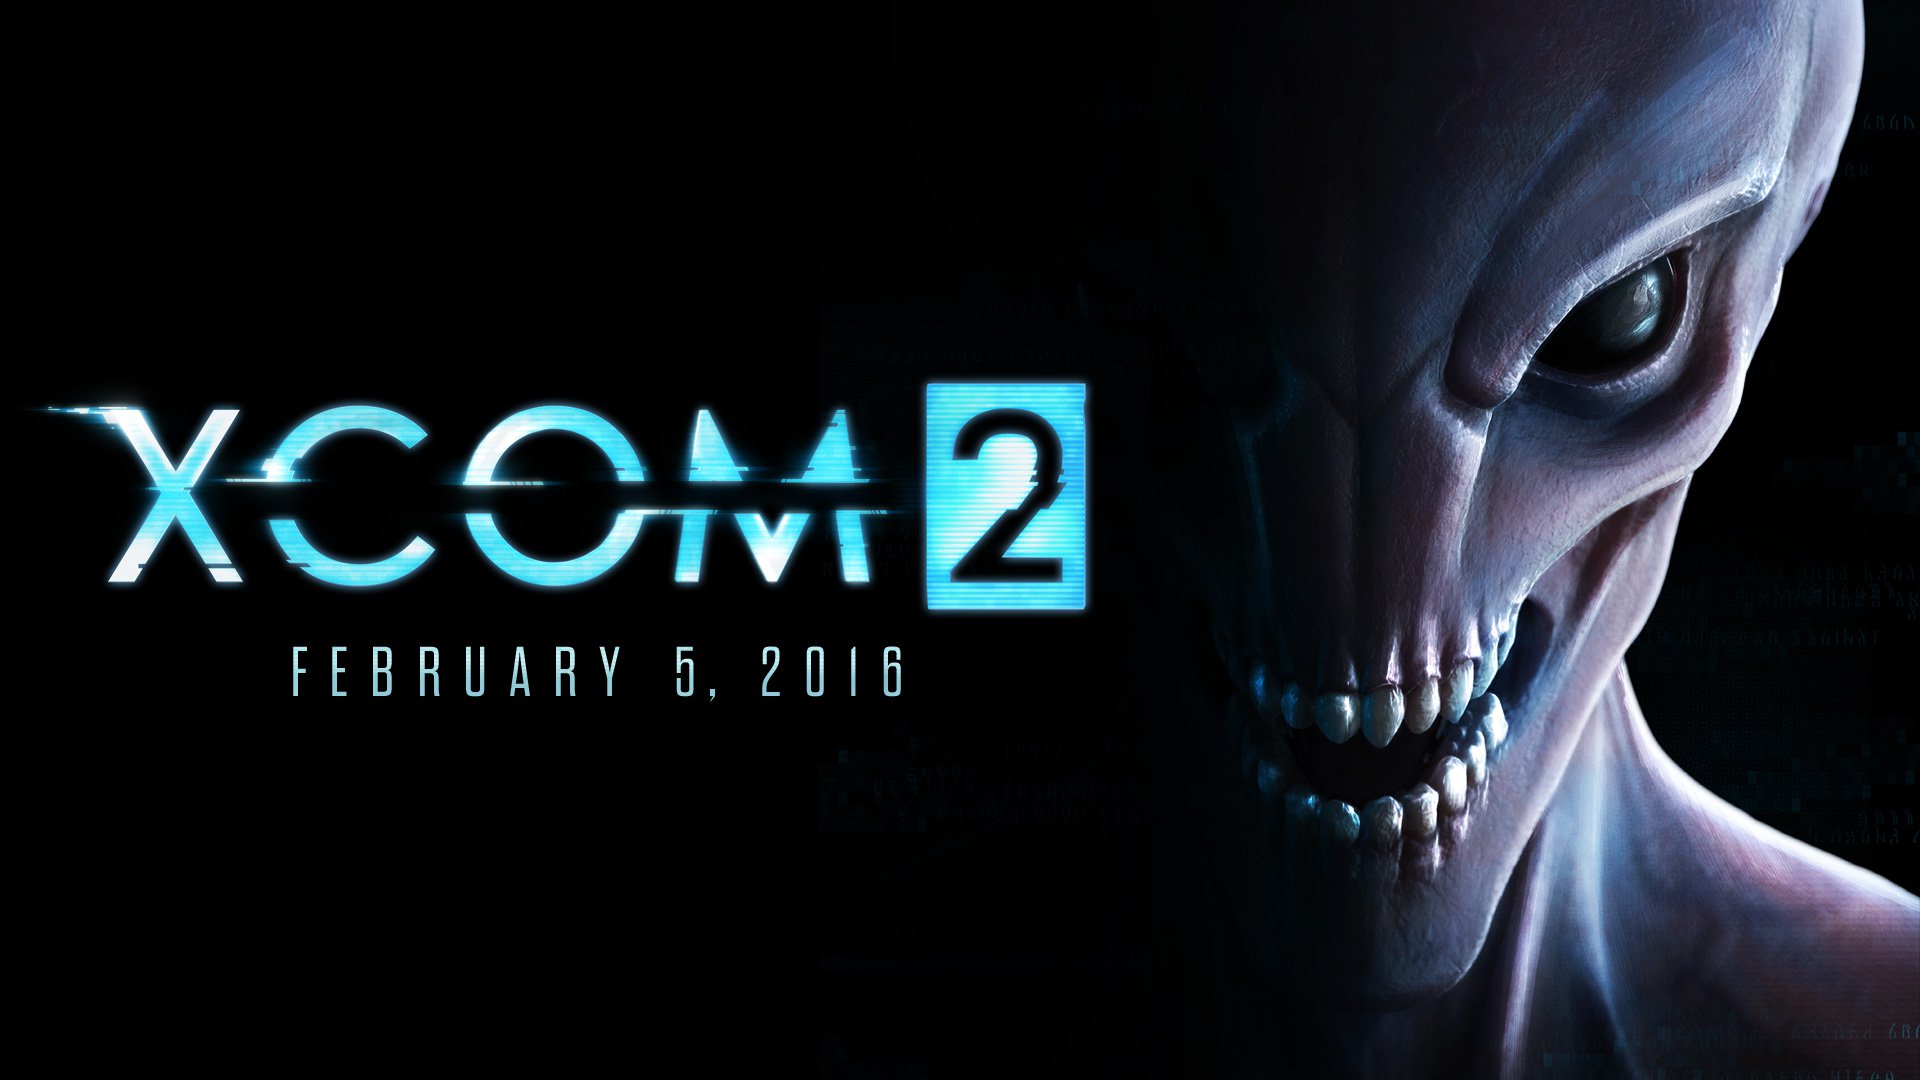 “XCOM 2” Delayed to 2016 - It Was Just Announced, So No Harm